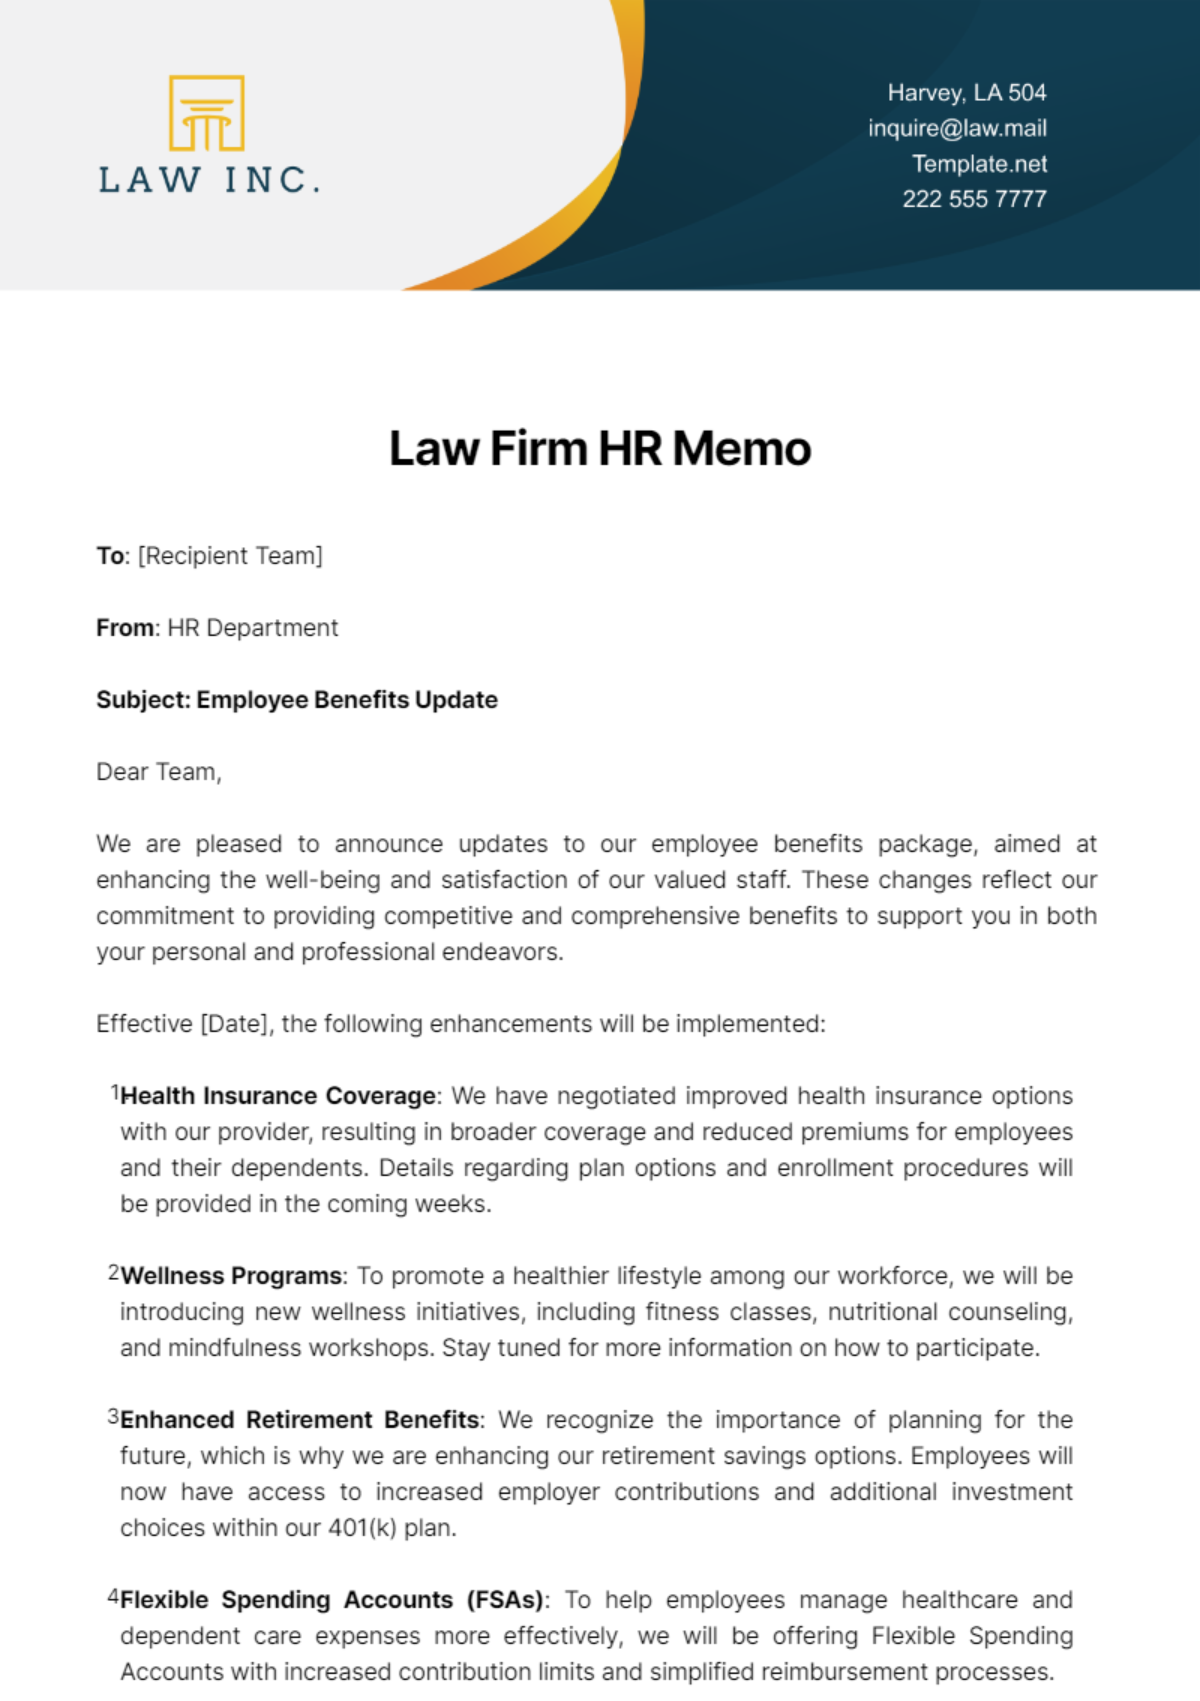 Free Law Firm HR Memo Template